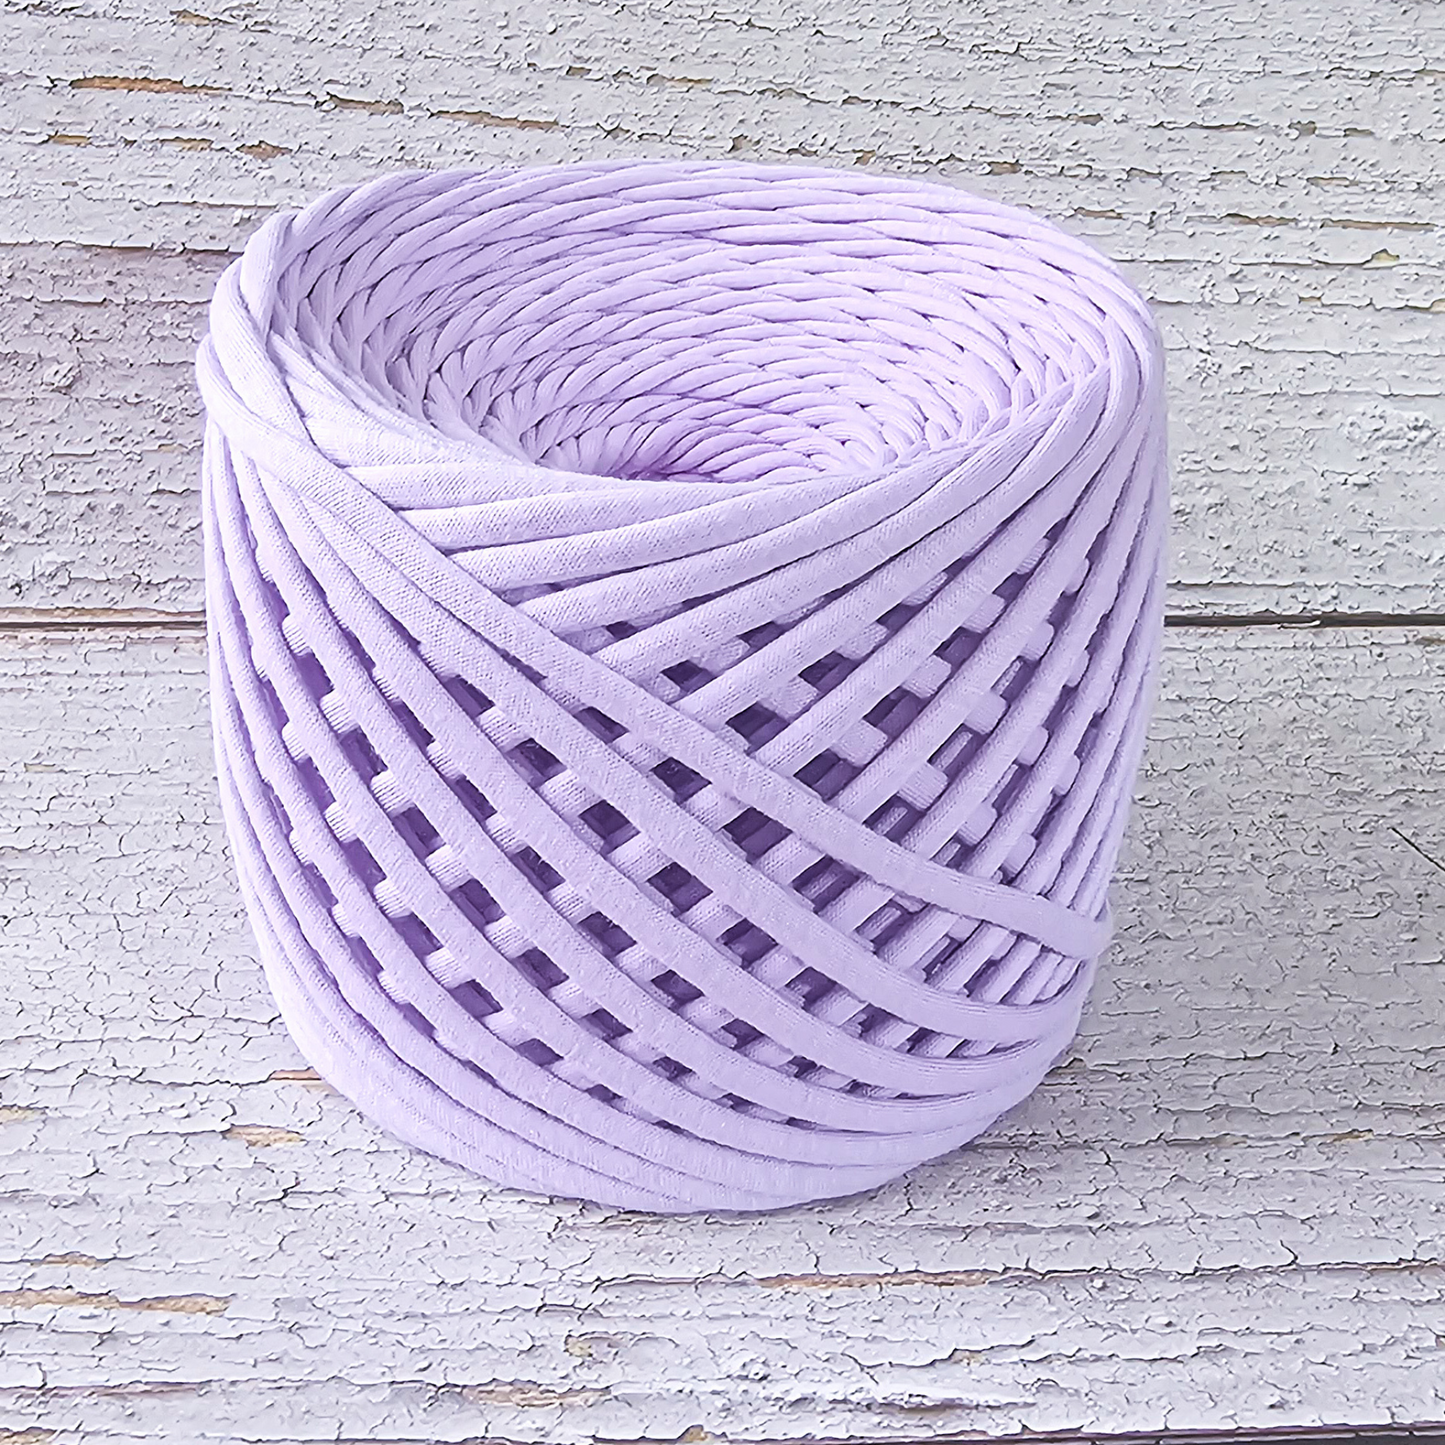 T-shirt yarn for crocheting baskets, bags, rugs and home decor. Lavender